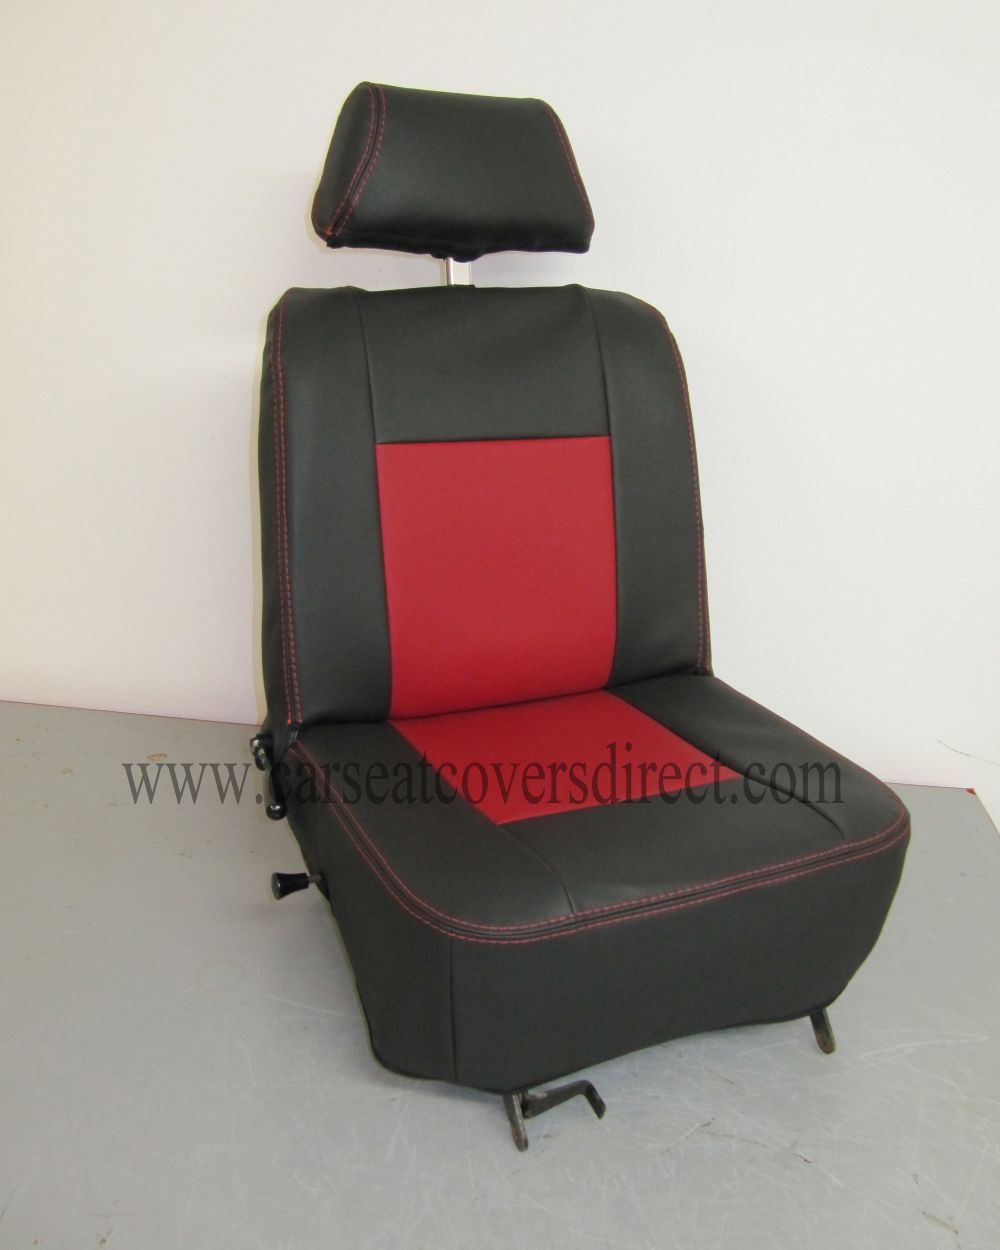 Iveco Daily Waterproof Seat Covers